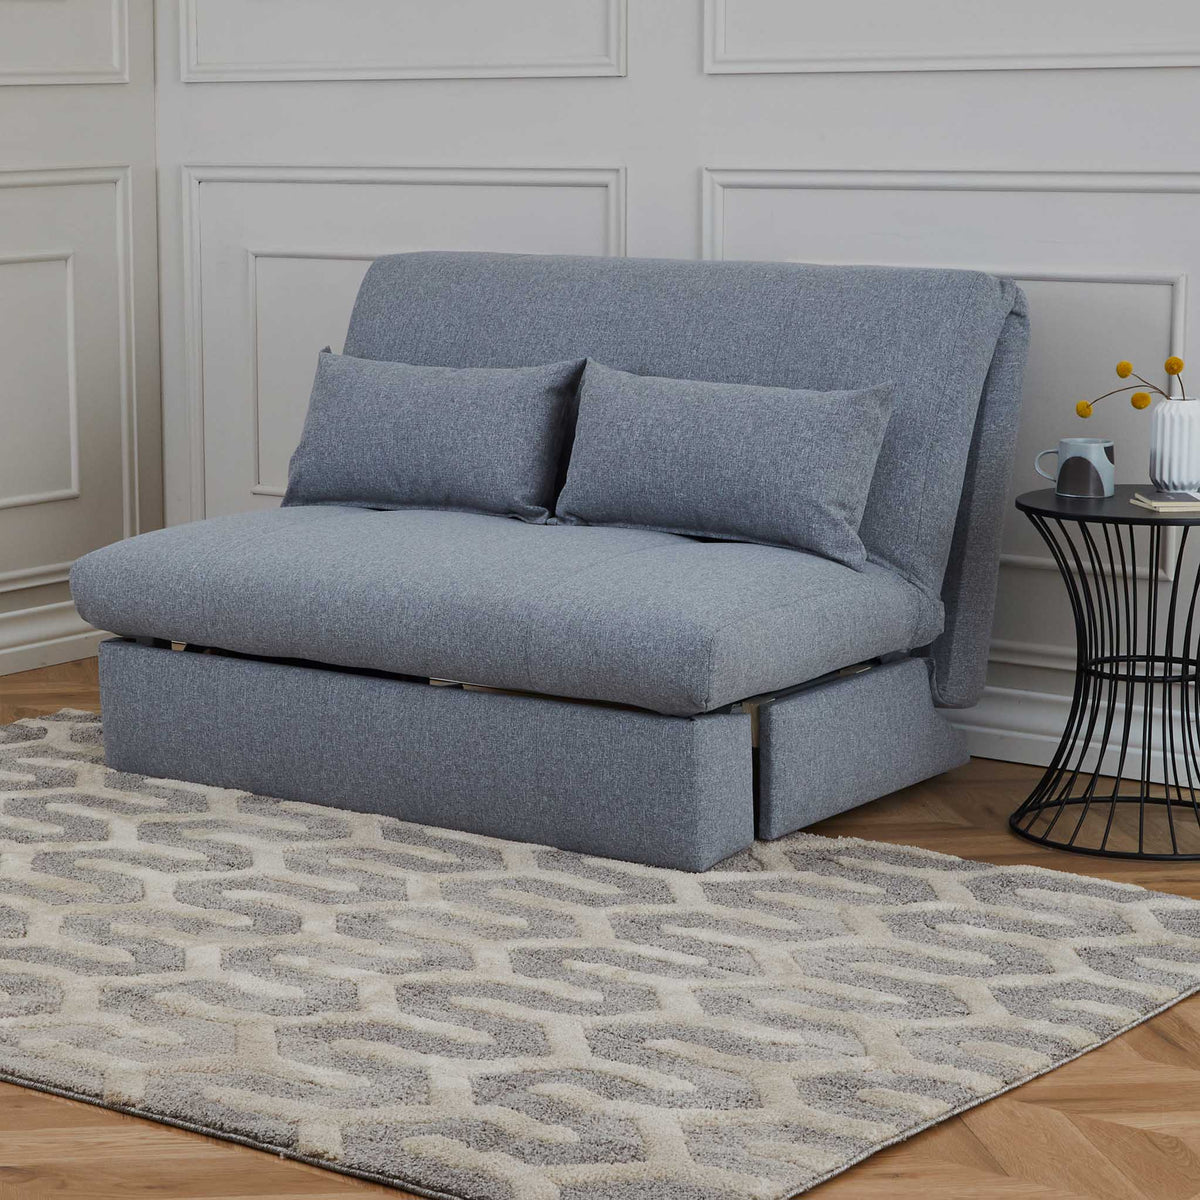 Camille Mid Grey Textured Weave Pull Out Sofa Bed